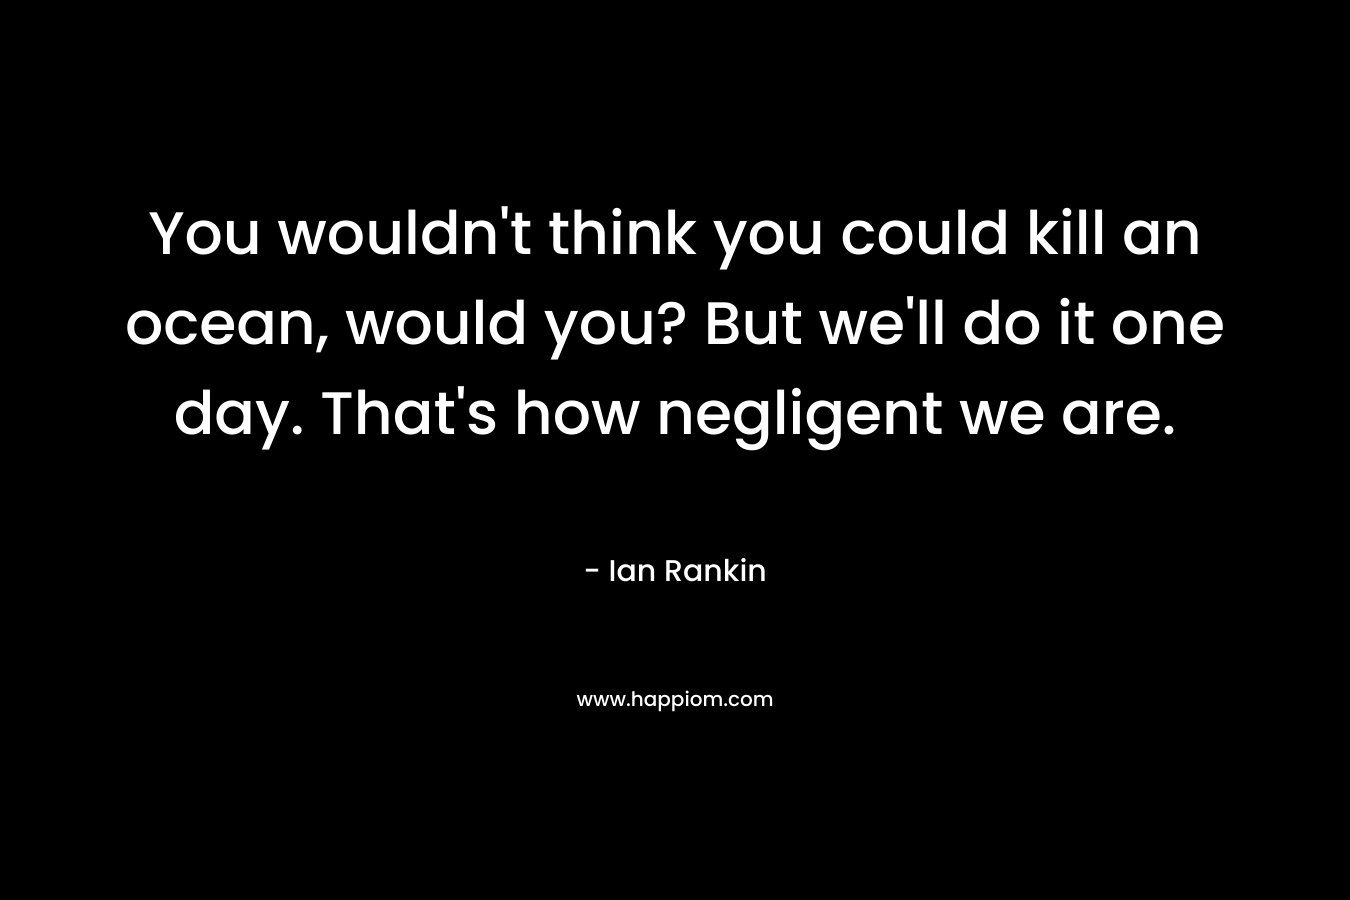 You wouldn’t think you could kill an ocean, would you? But we’ll do it one day. That’s how negligent we are. – Ian Rankin